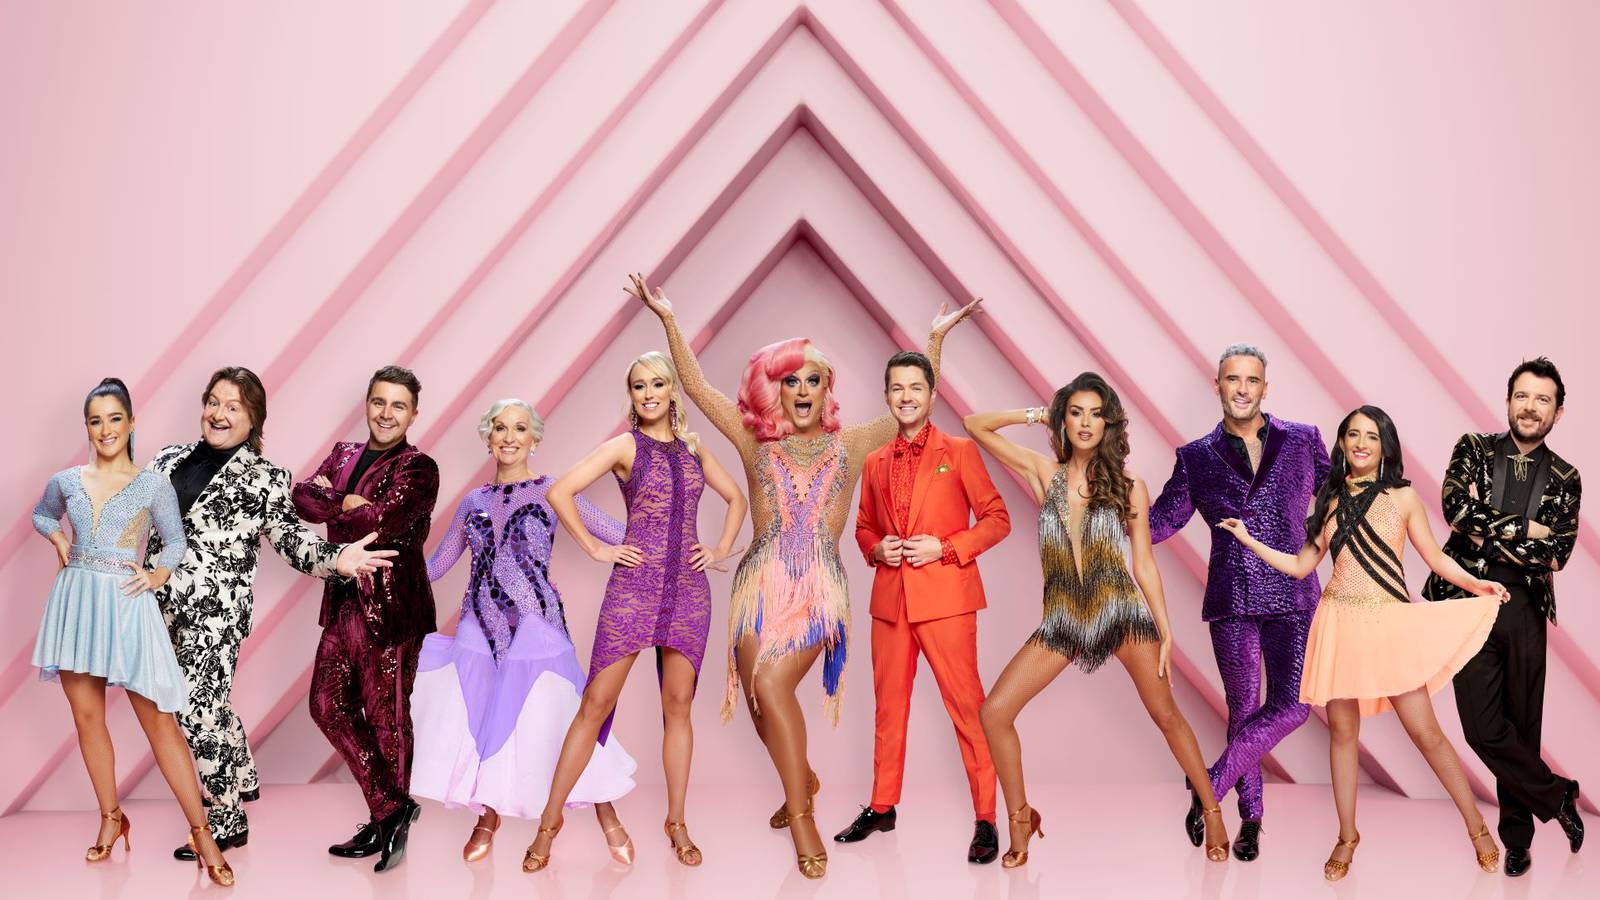 dancing with the stars tour 2023 song list